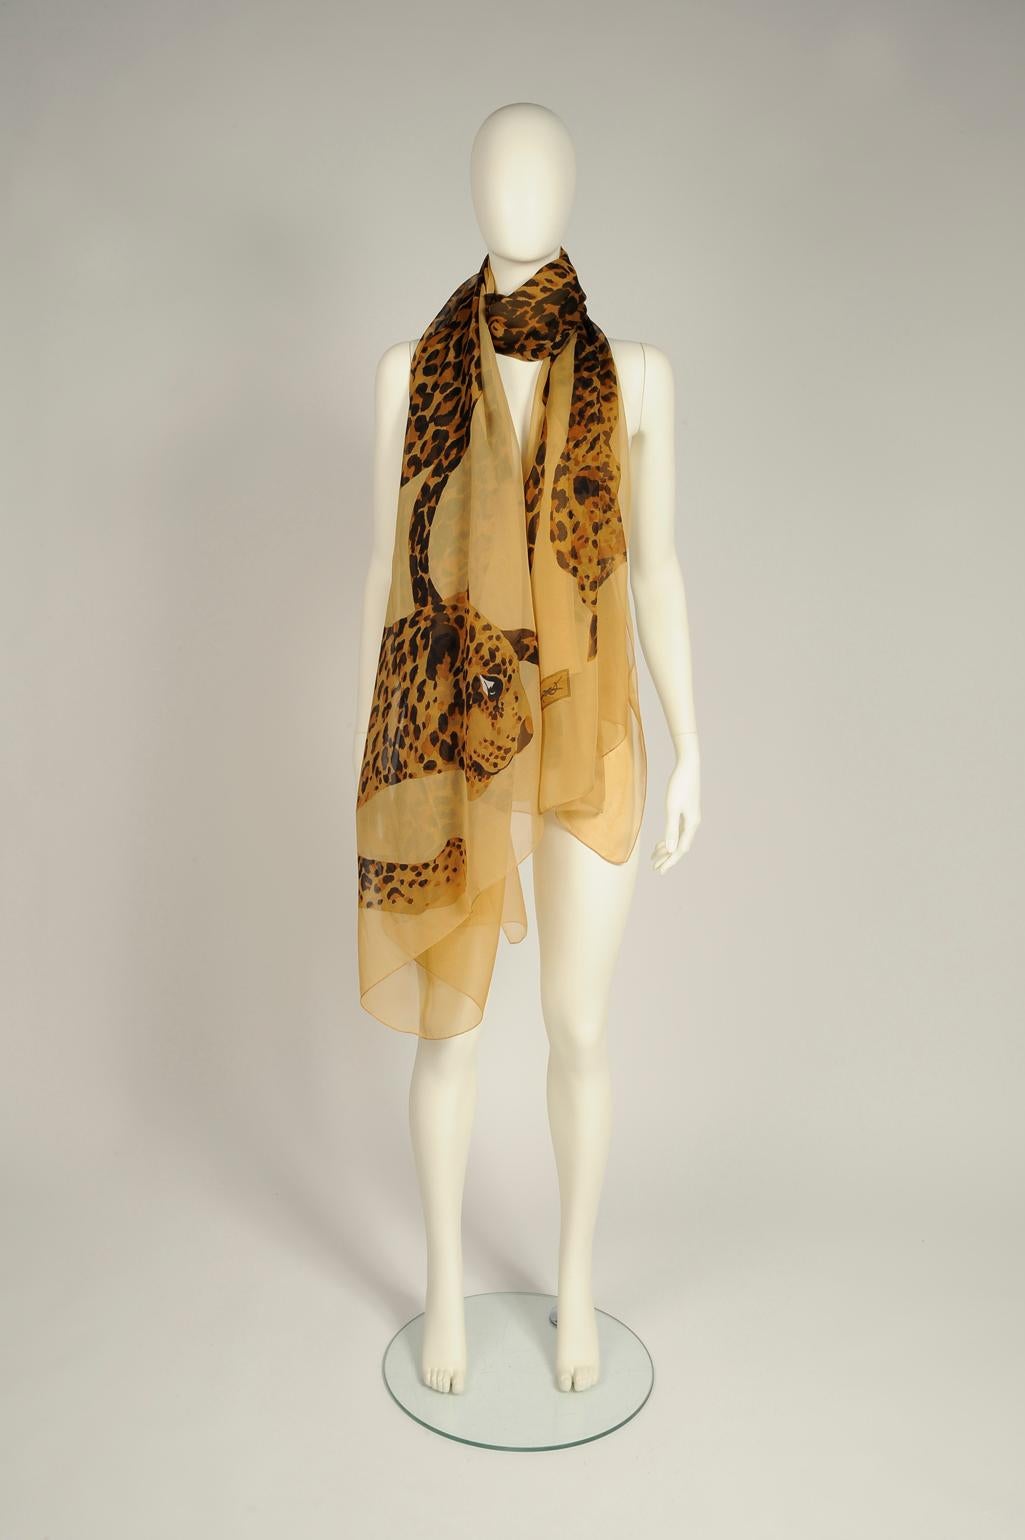 From the iconic 1986-1987 Fall-Winter collection with the leopard theme, this runway (see picture 3) YSL shawl scarf is the largest I’ve ever seen ! Made from refined breezy silk chiffon, it is decorated with multiple leopards in its usual color